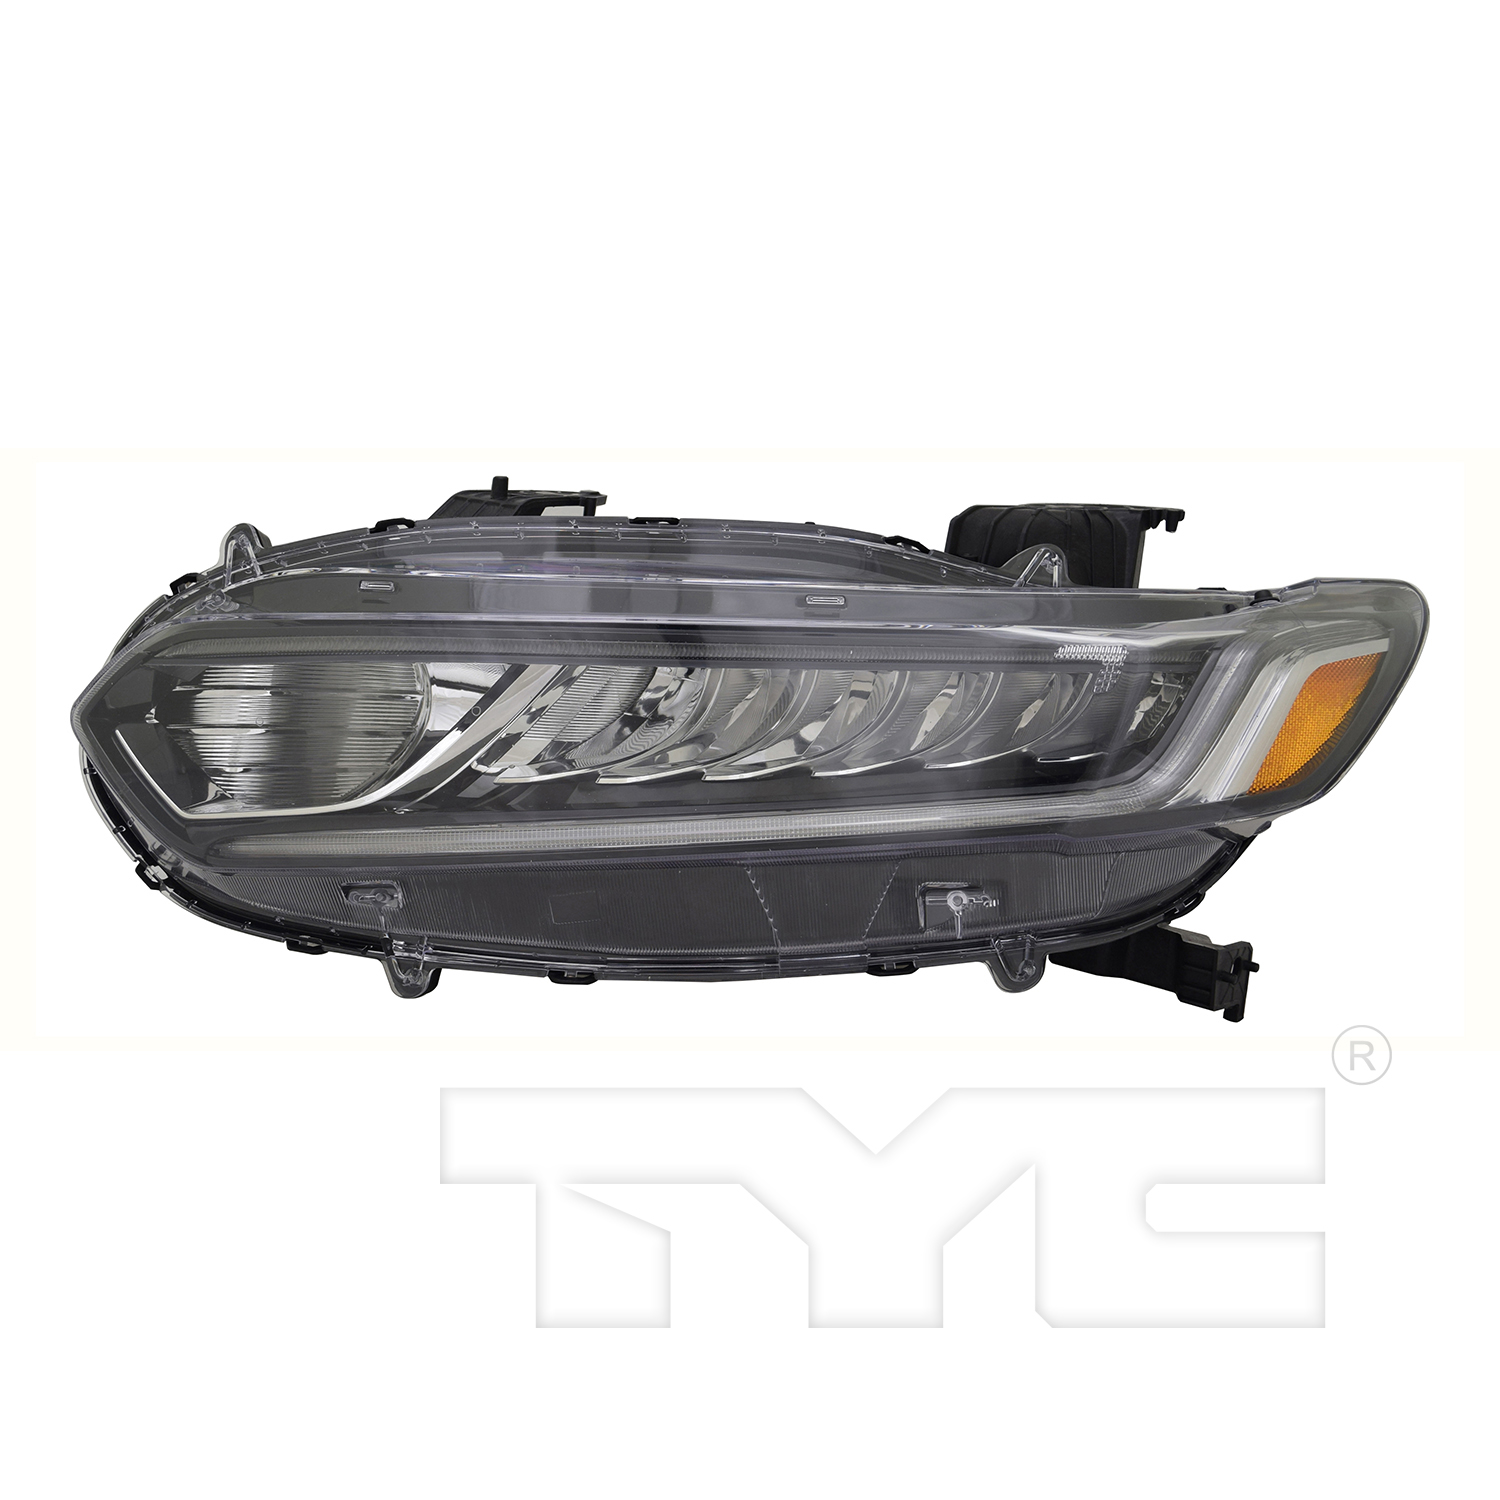 Aftermarket HEADLIGHTS for HONDA - ACCORD, ACCORD,18-22,LT Headlamp assy composite